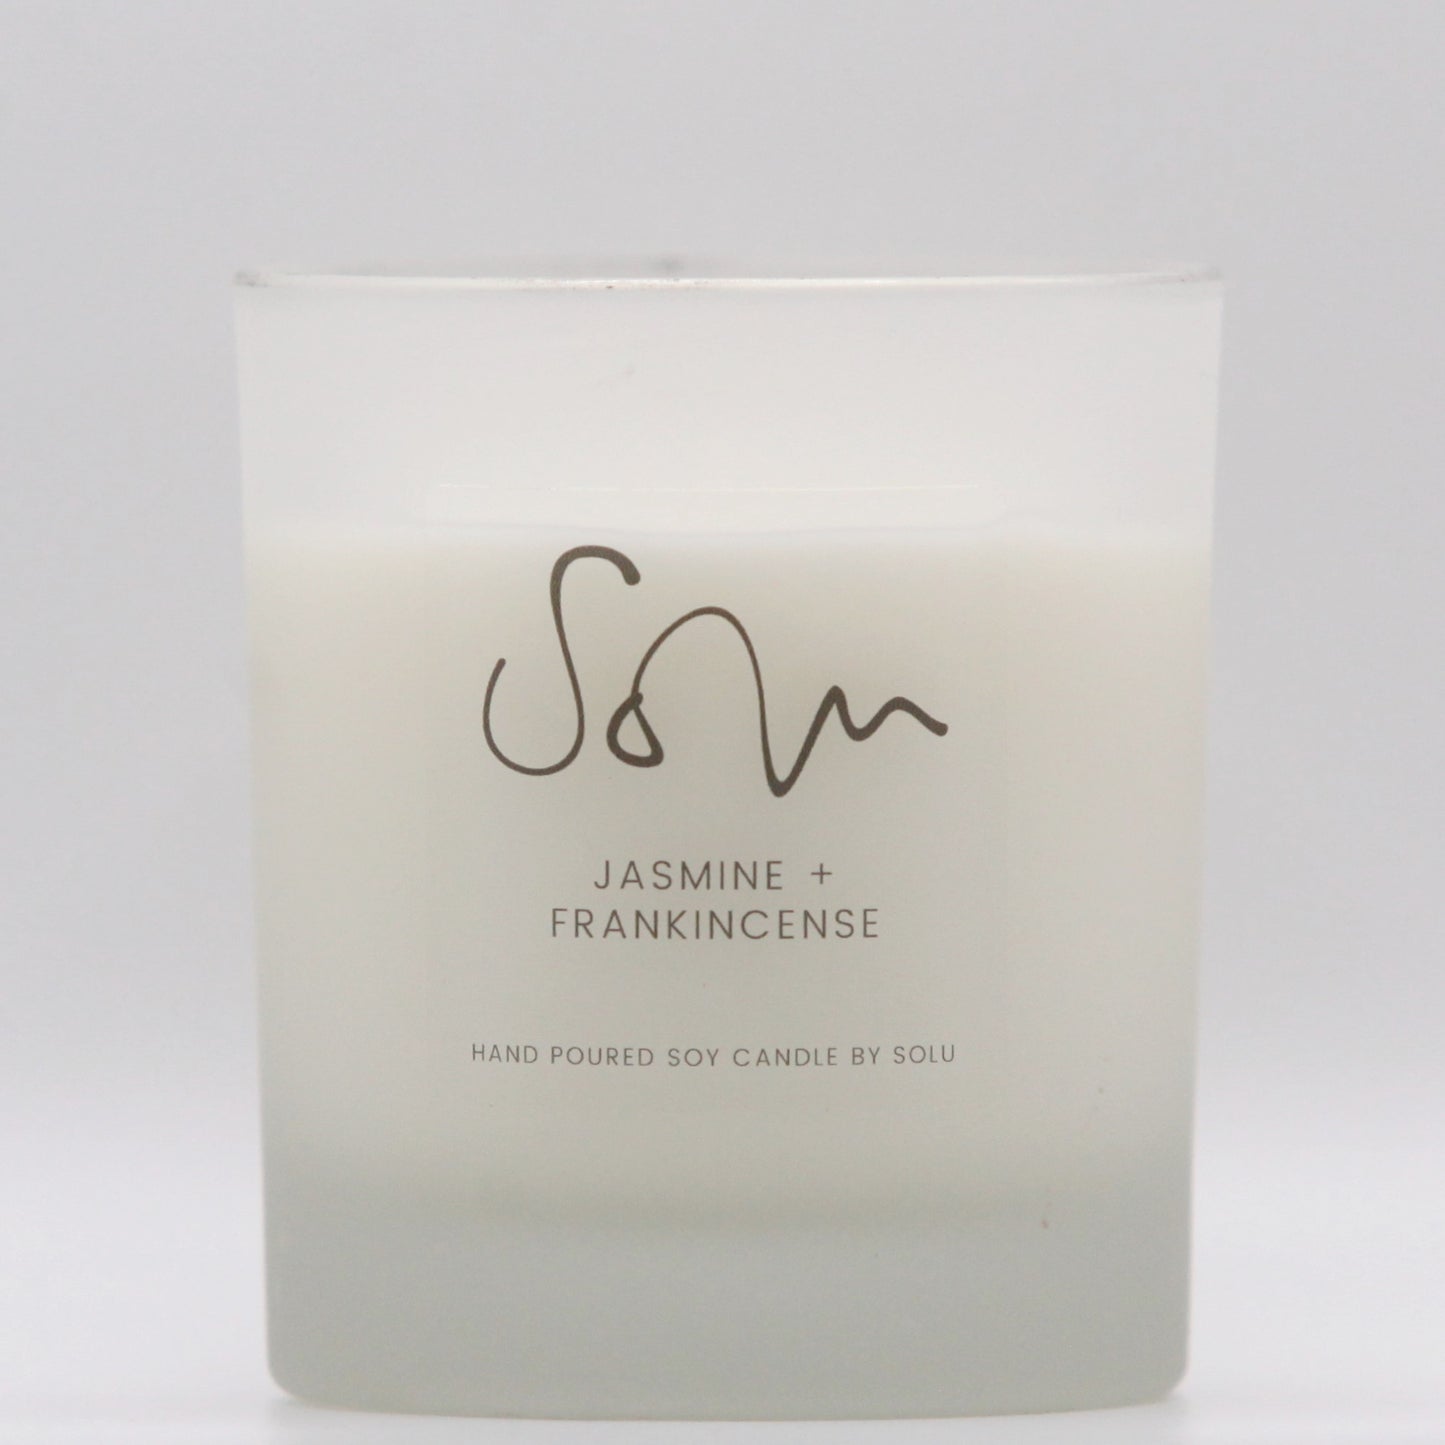 Jasmine + Frankincense Soy Wax Candle - Solu Candles